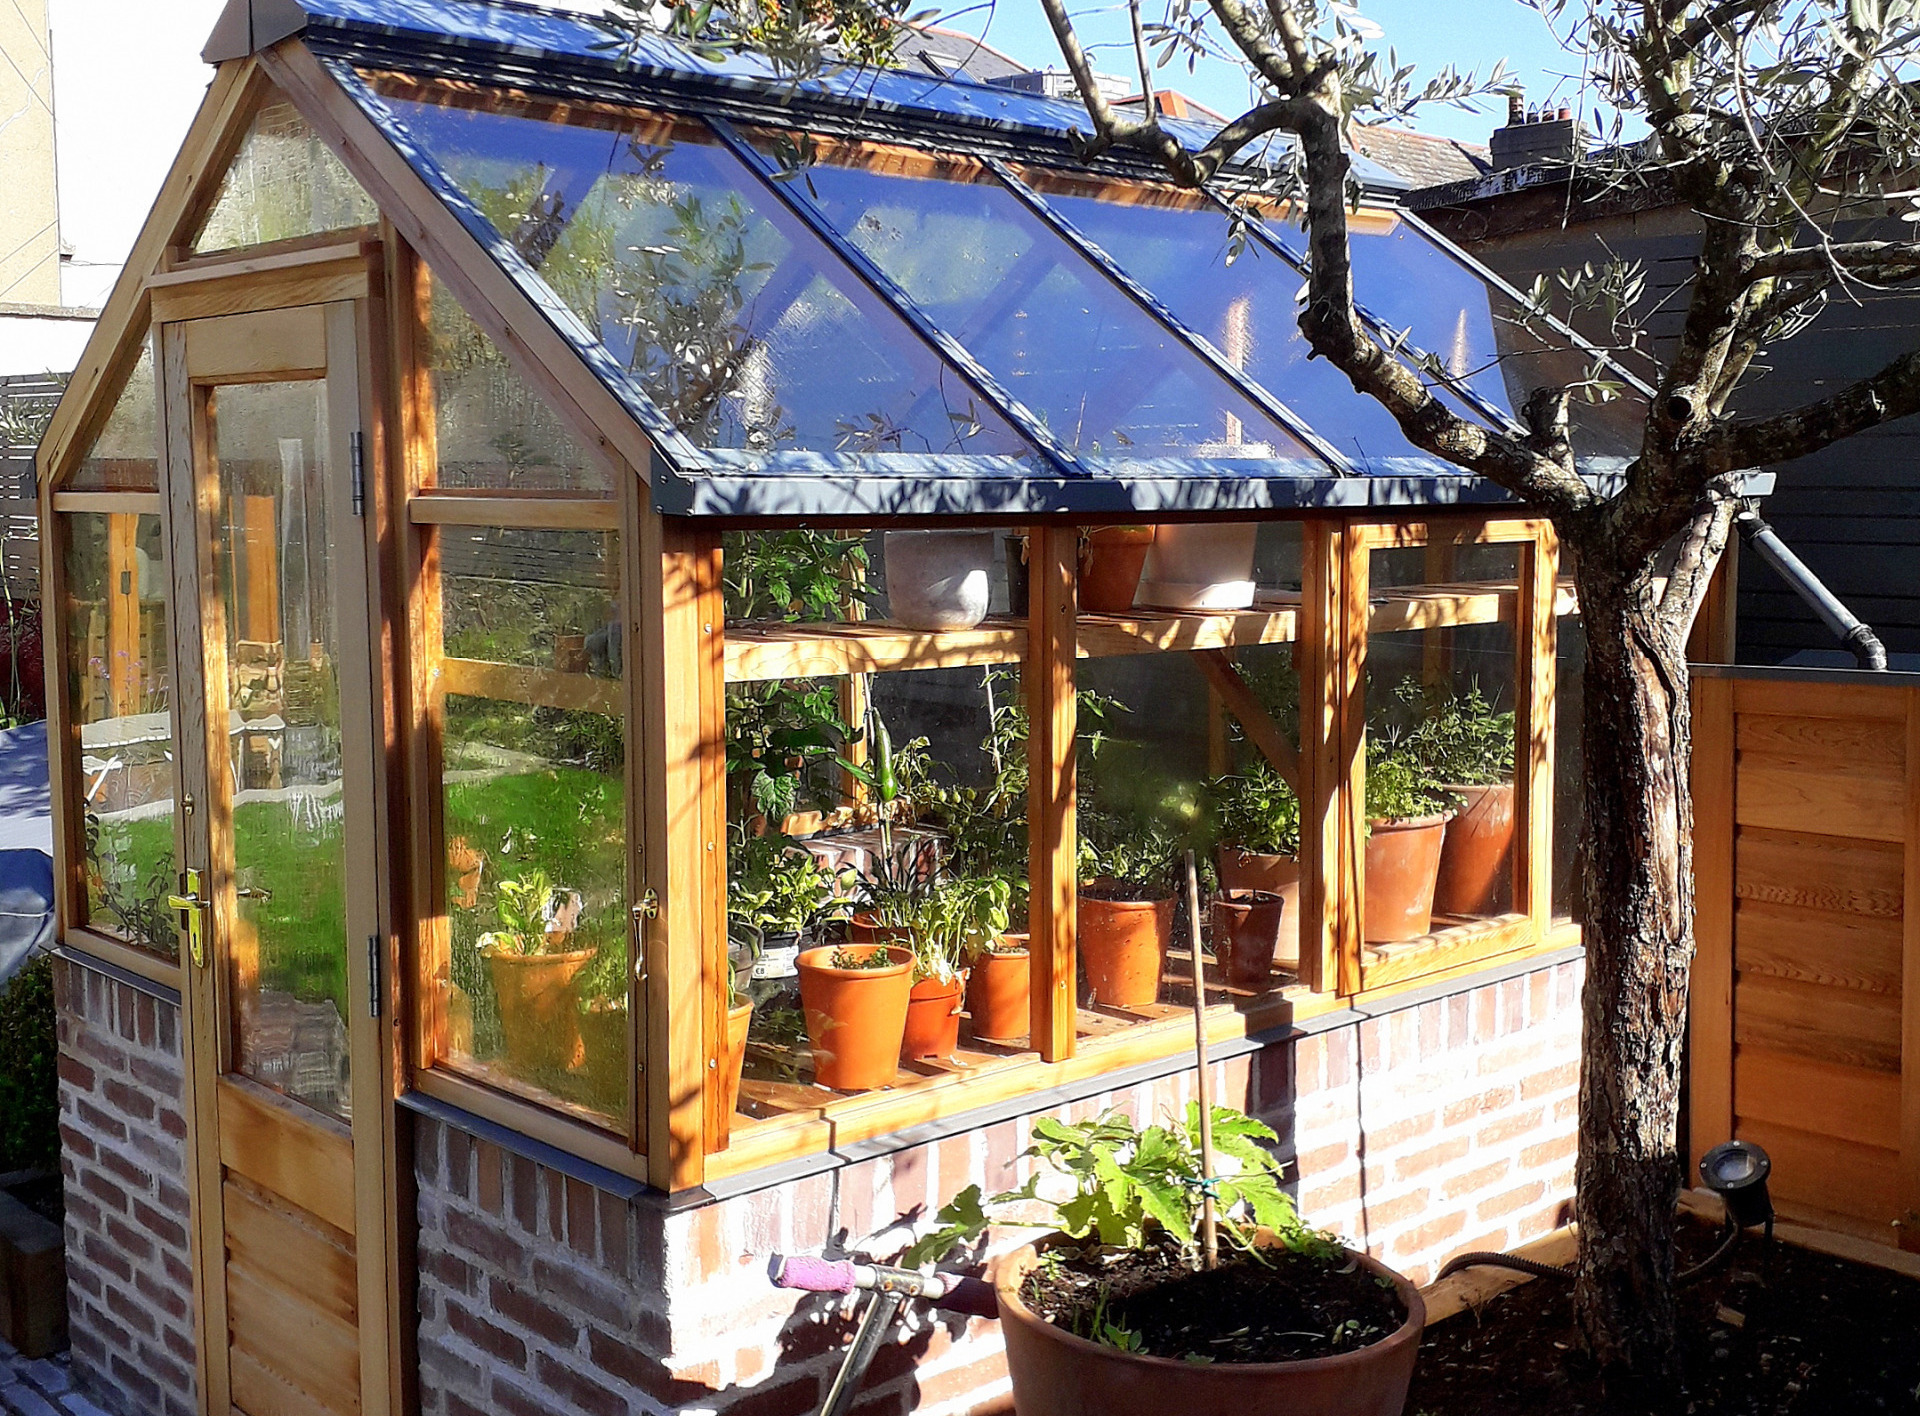 Gabriel Ash Classic Six Greenhouse (6 x 8) on low wall and fitted with hinged door, cedar water butt | Rathmines, Dublin 6 | the only timber greenhouses endorsed by the RHS | Owen Chubb  087-2306128